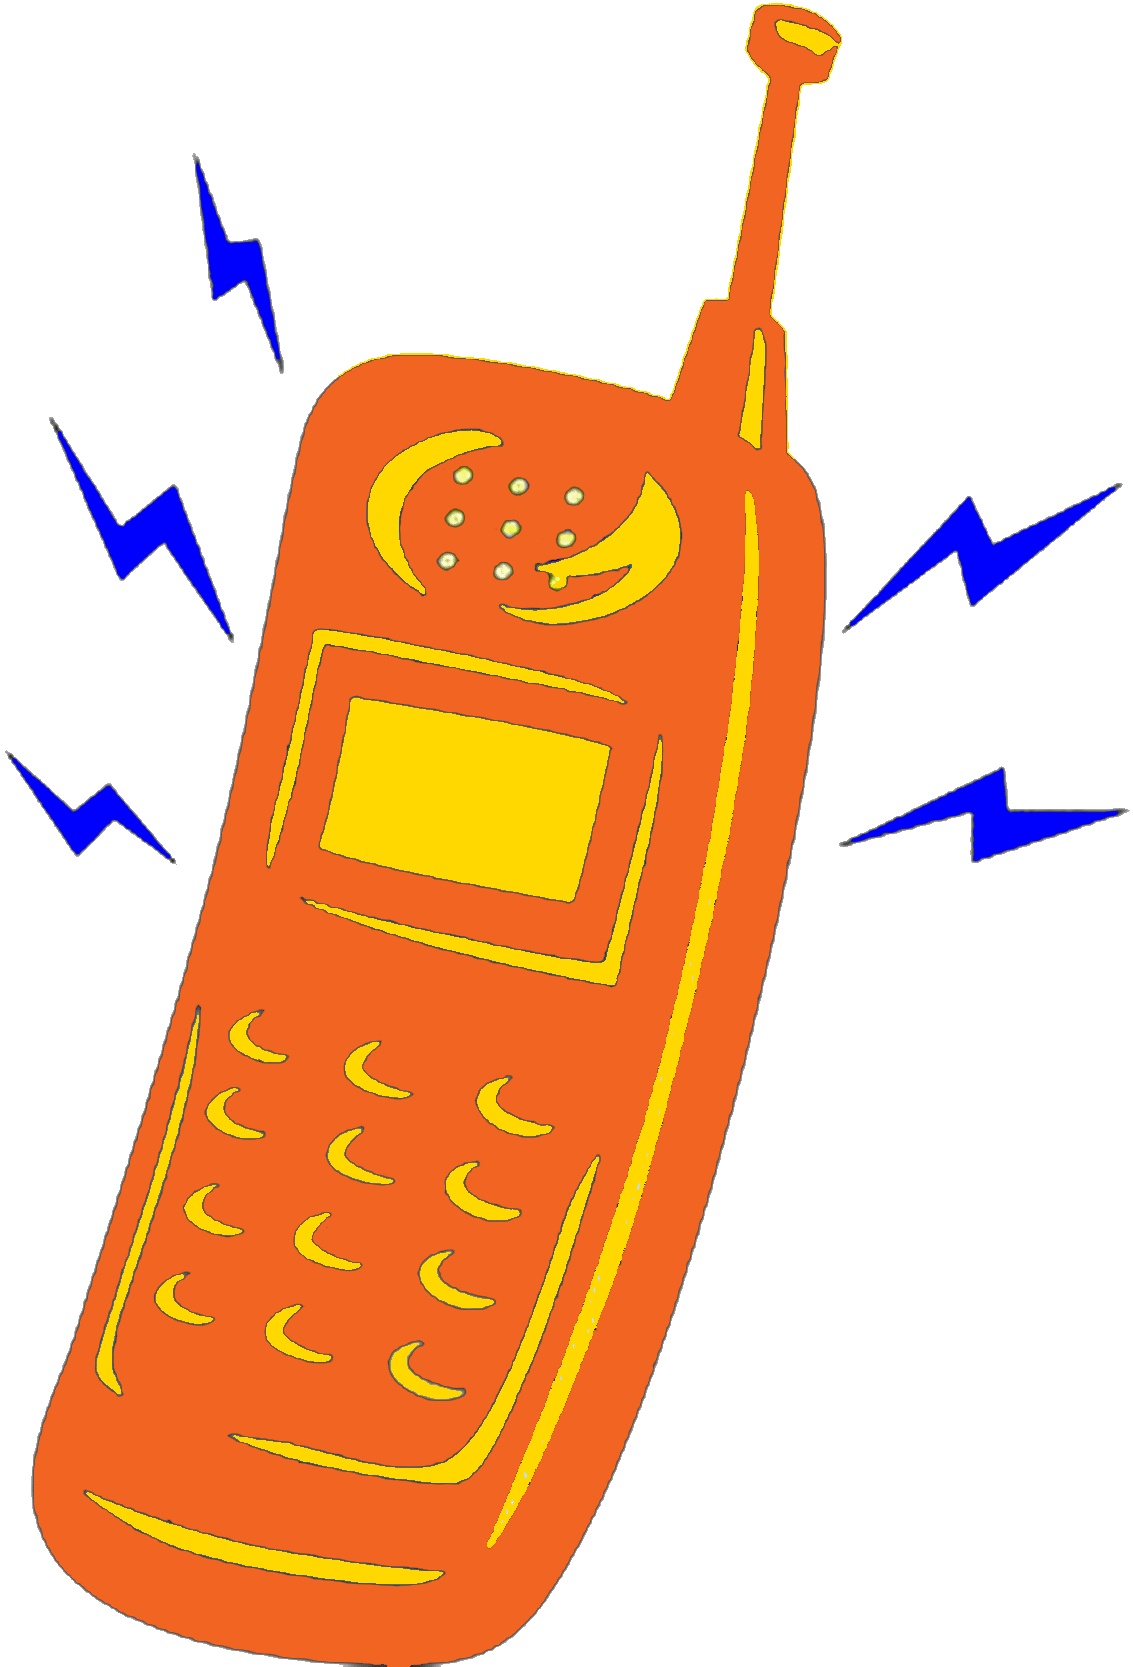 Ringing pencil and in. Telephone clipart rang